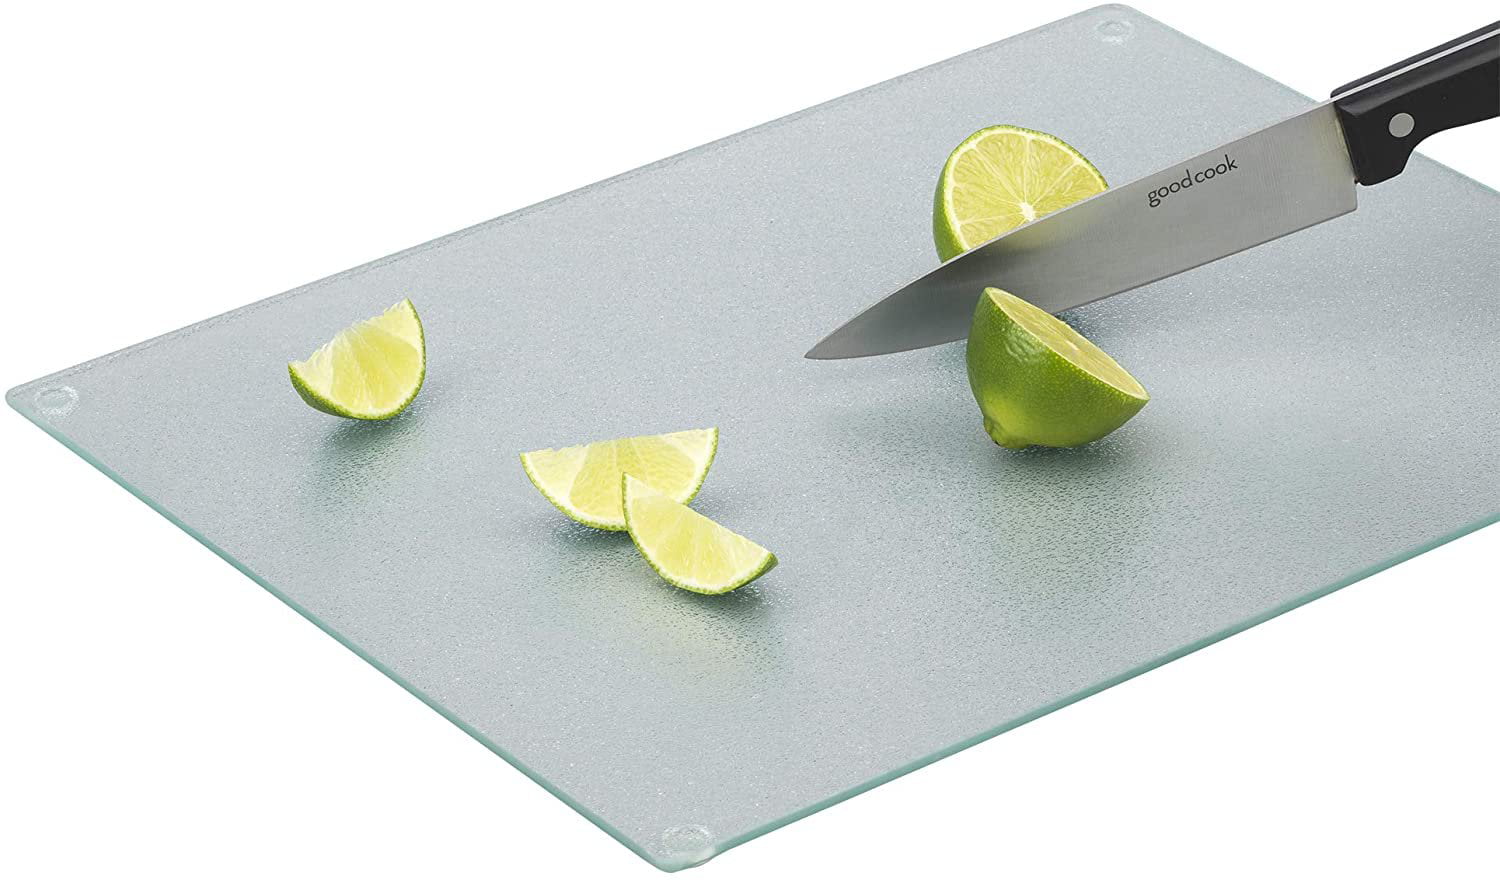 Clear 12 x 15 Good Cook Tempered Glass Cutting Board 